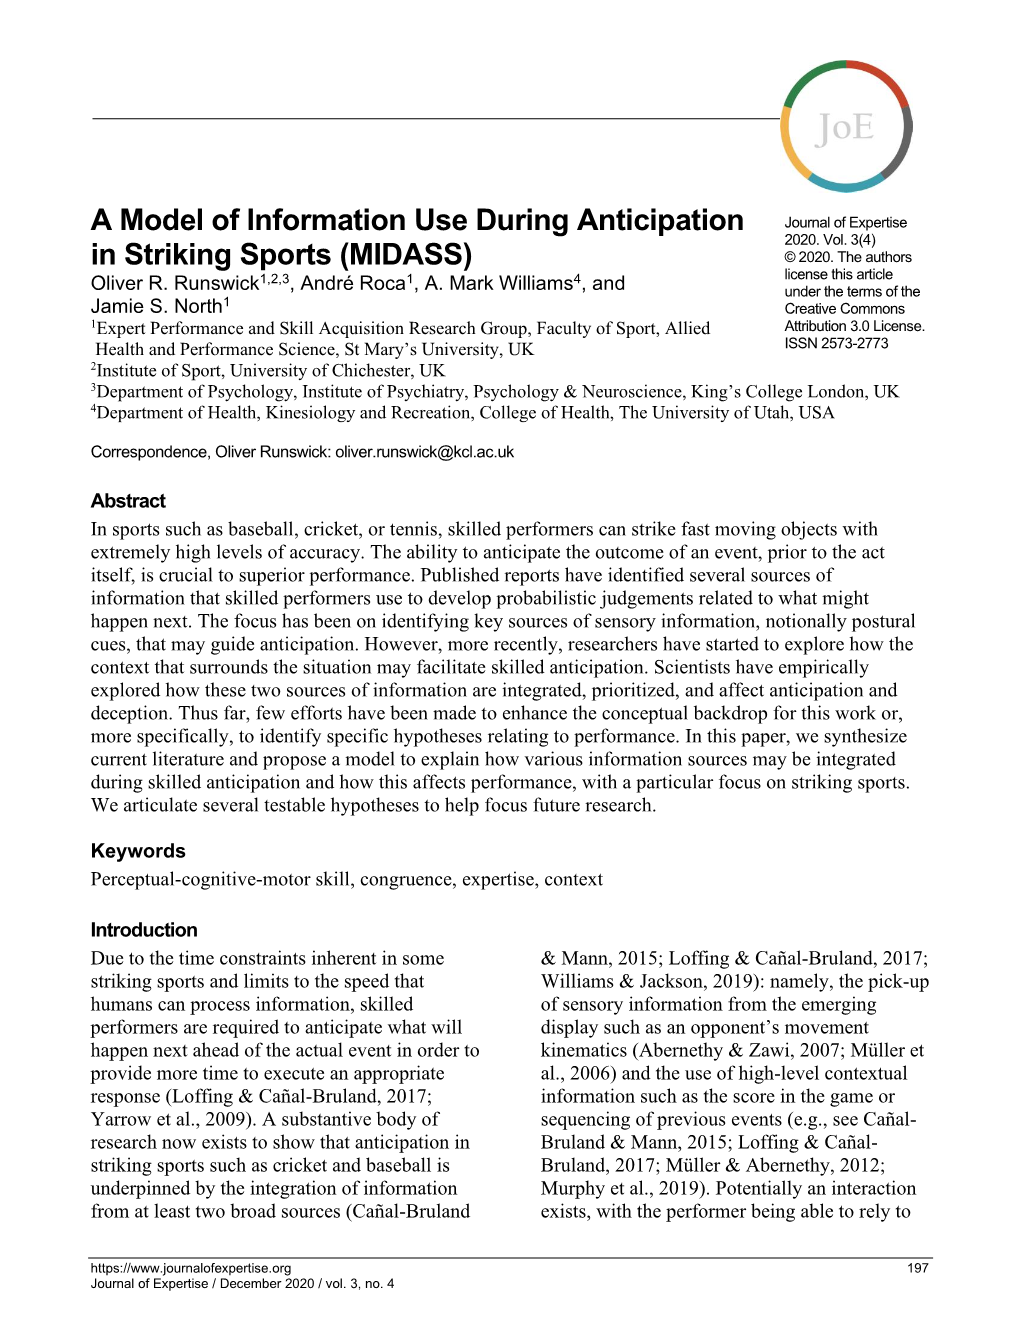 A Model of Information Use During Anticipation In